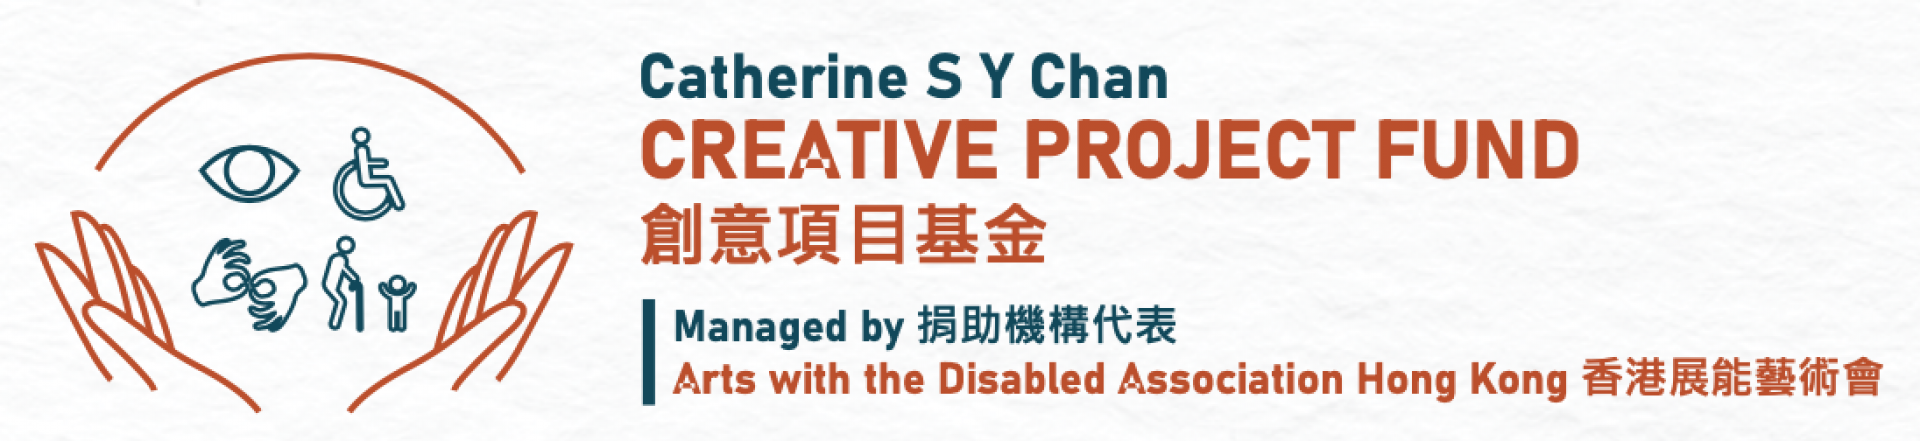 2022/23 Catherine SY Chan Creative Project Fund: Call for Round 3 Application